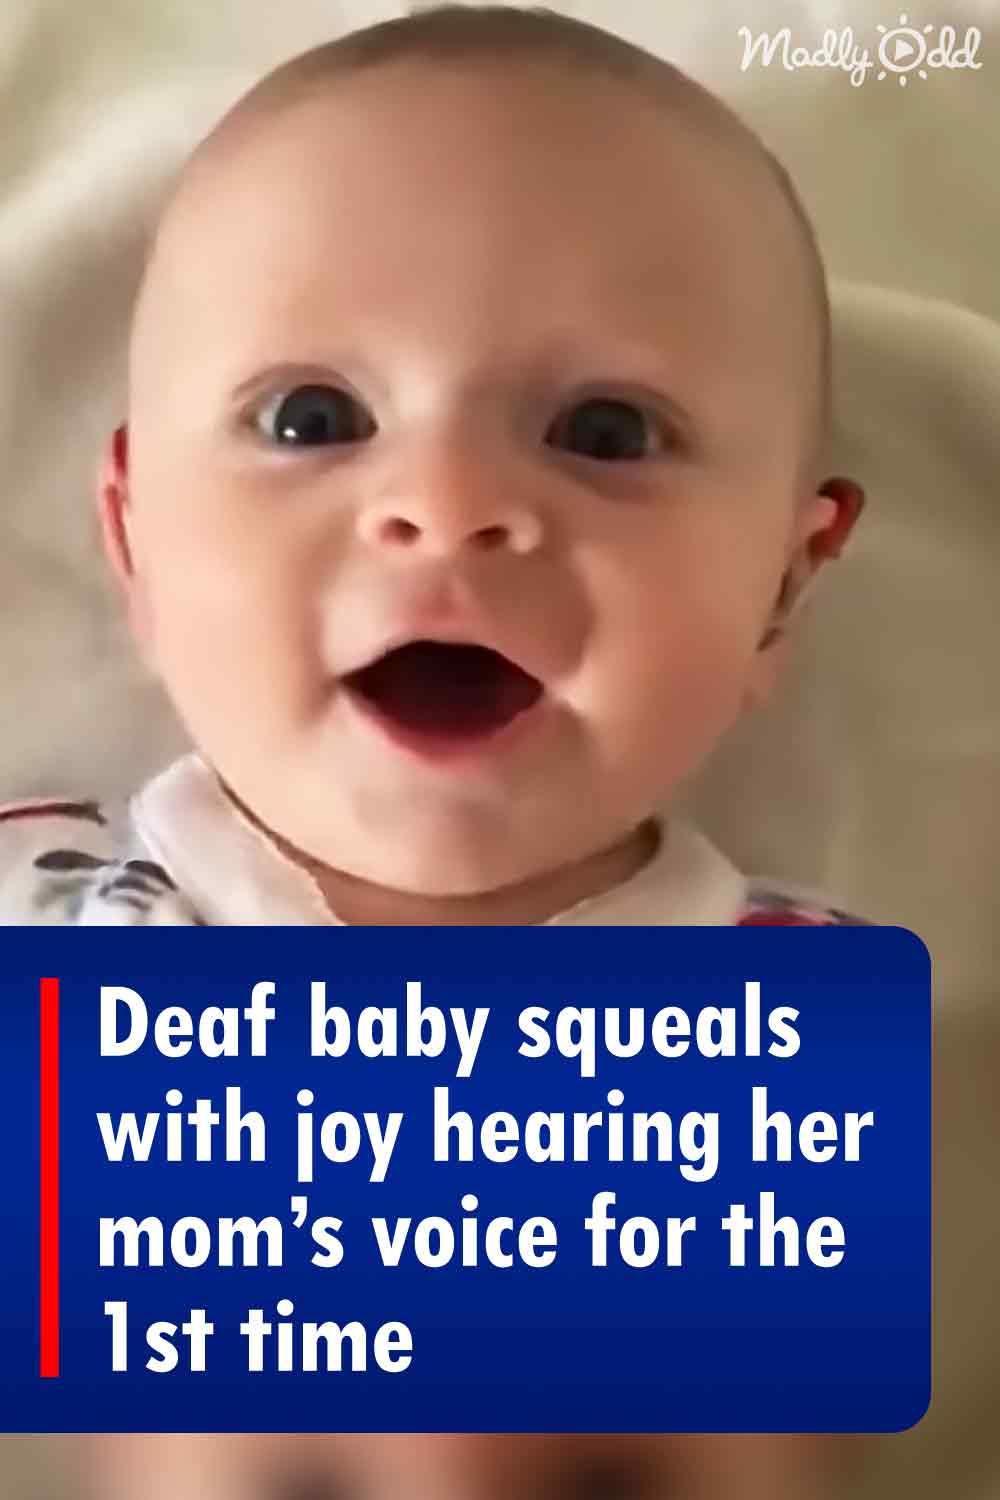 Deaf baby squeals with joy hearing her mom’s voice for the 1st time